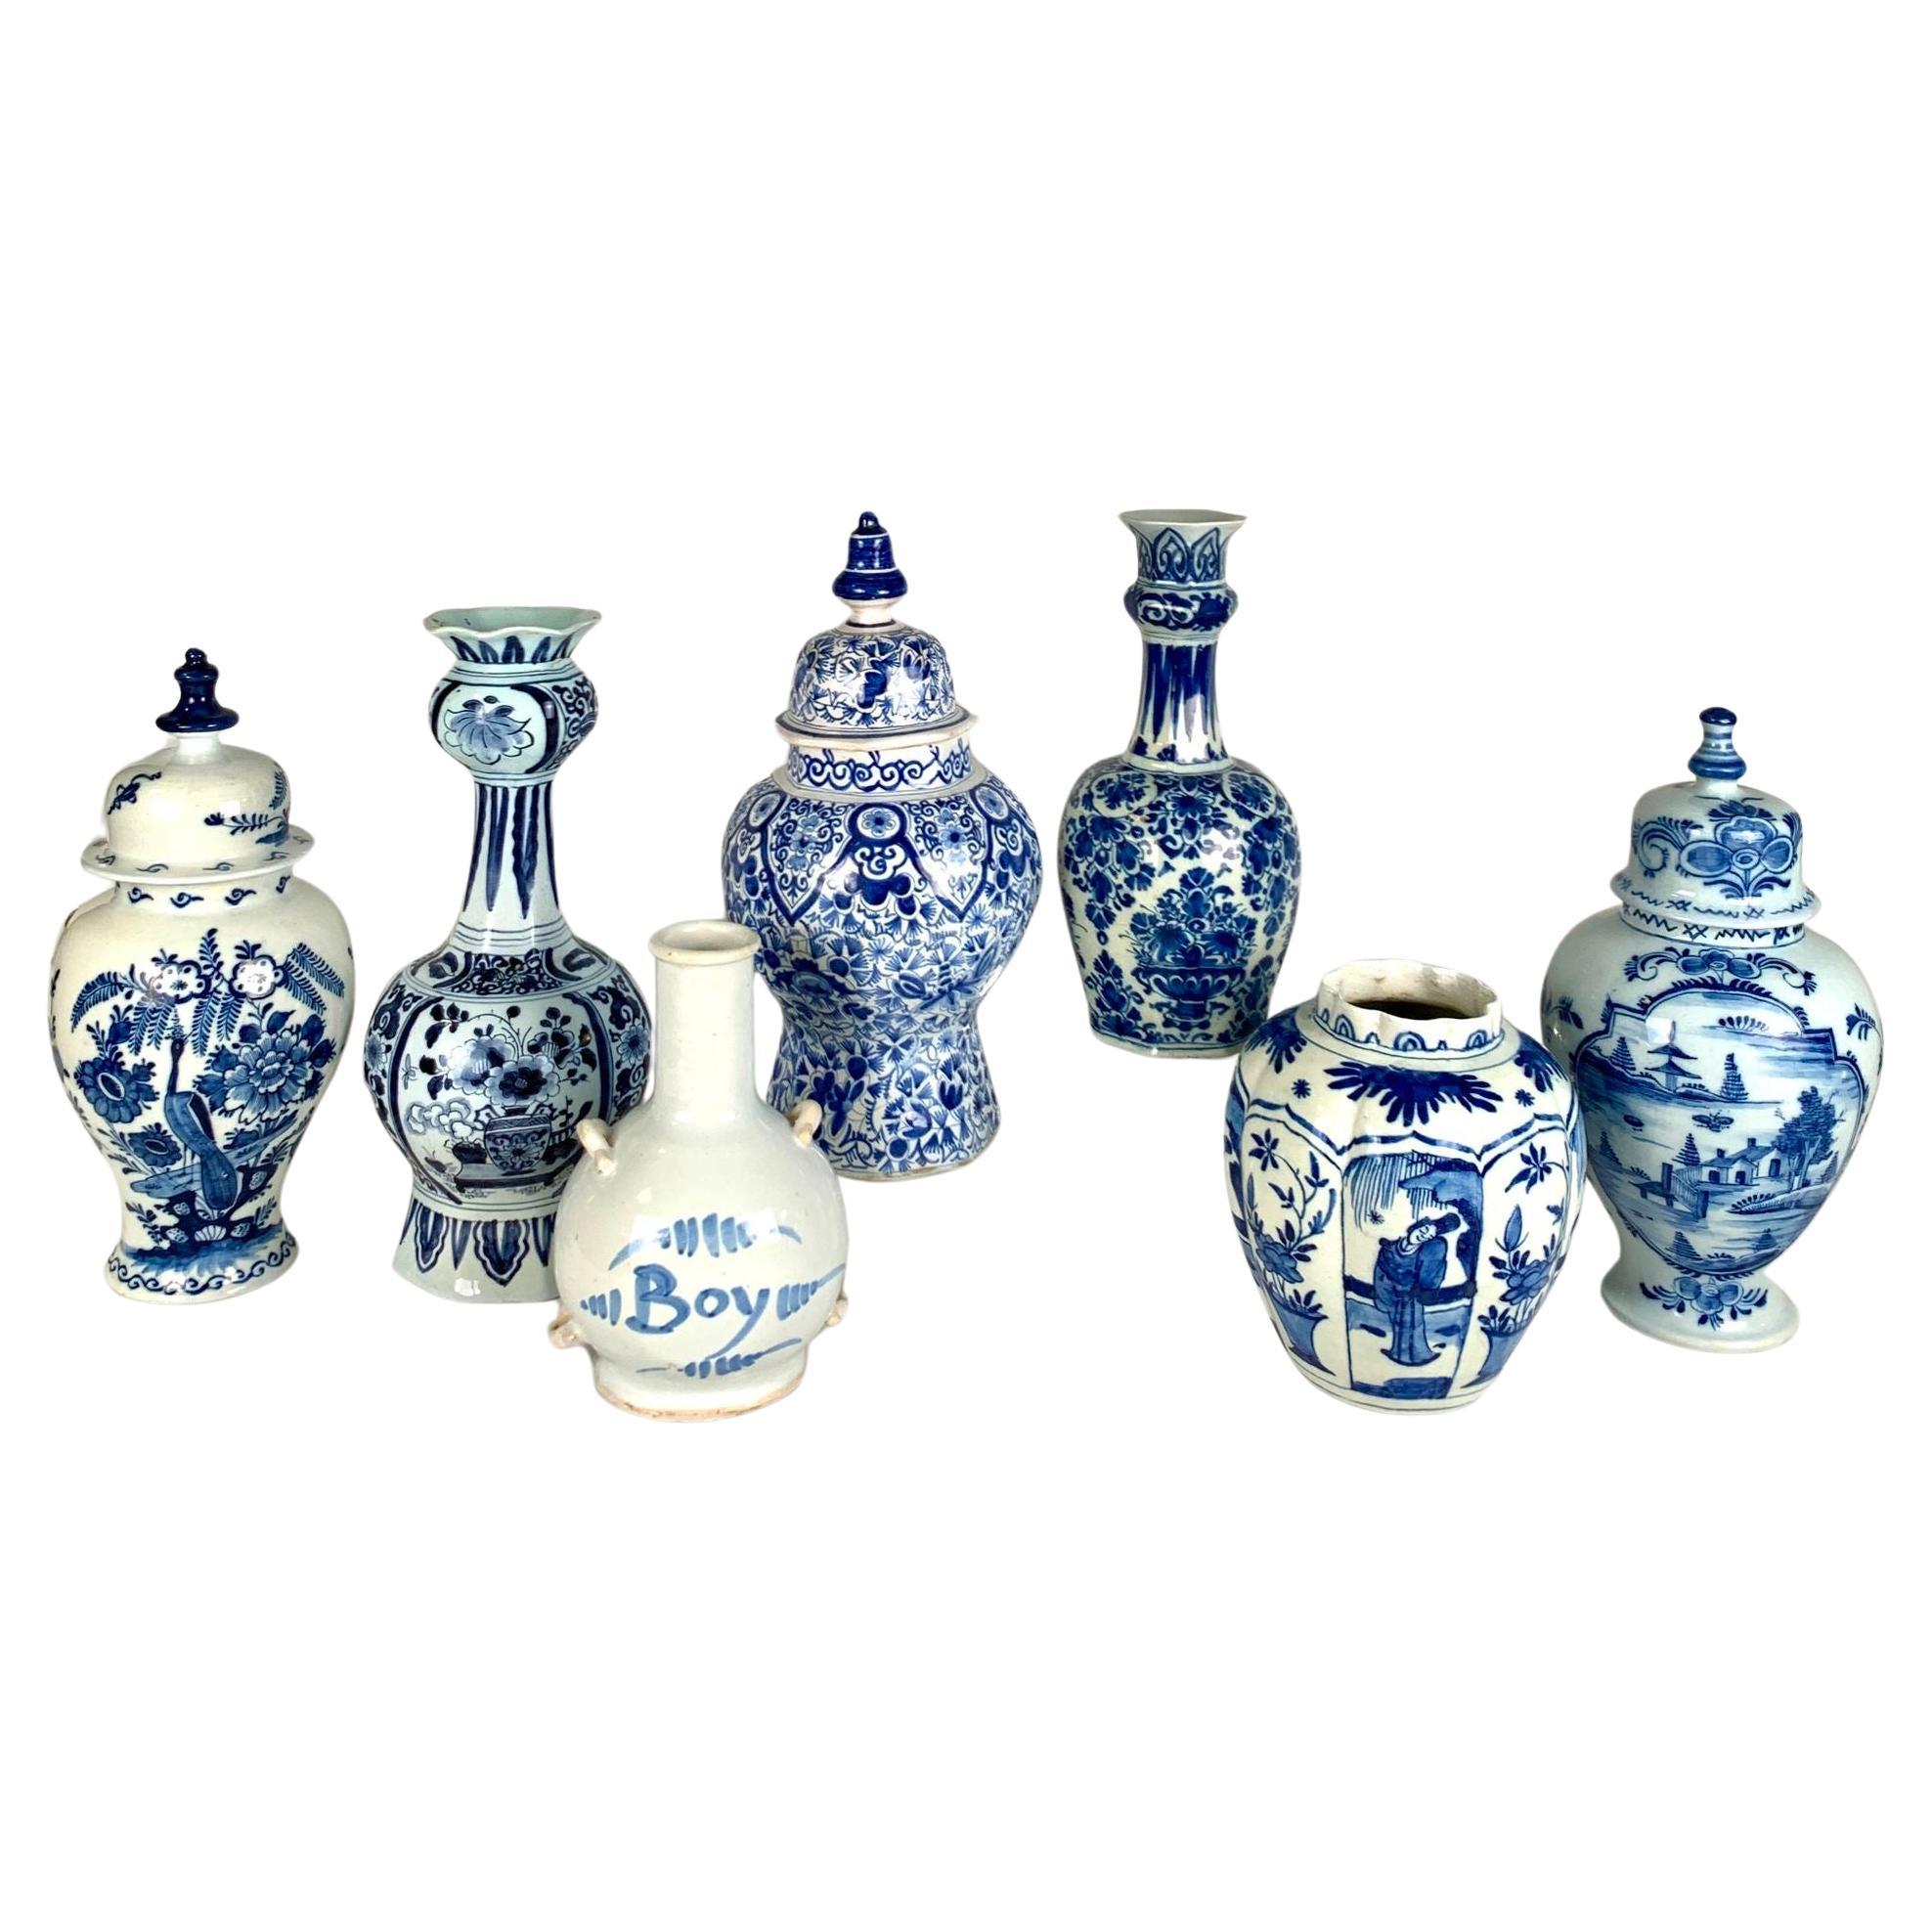  Blue and White Delft Small Vases and Jars 18th Century A Group of Seven For Sale